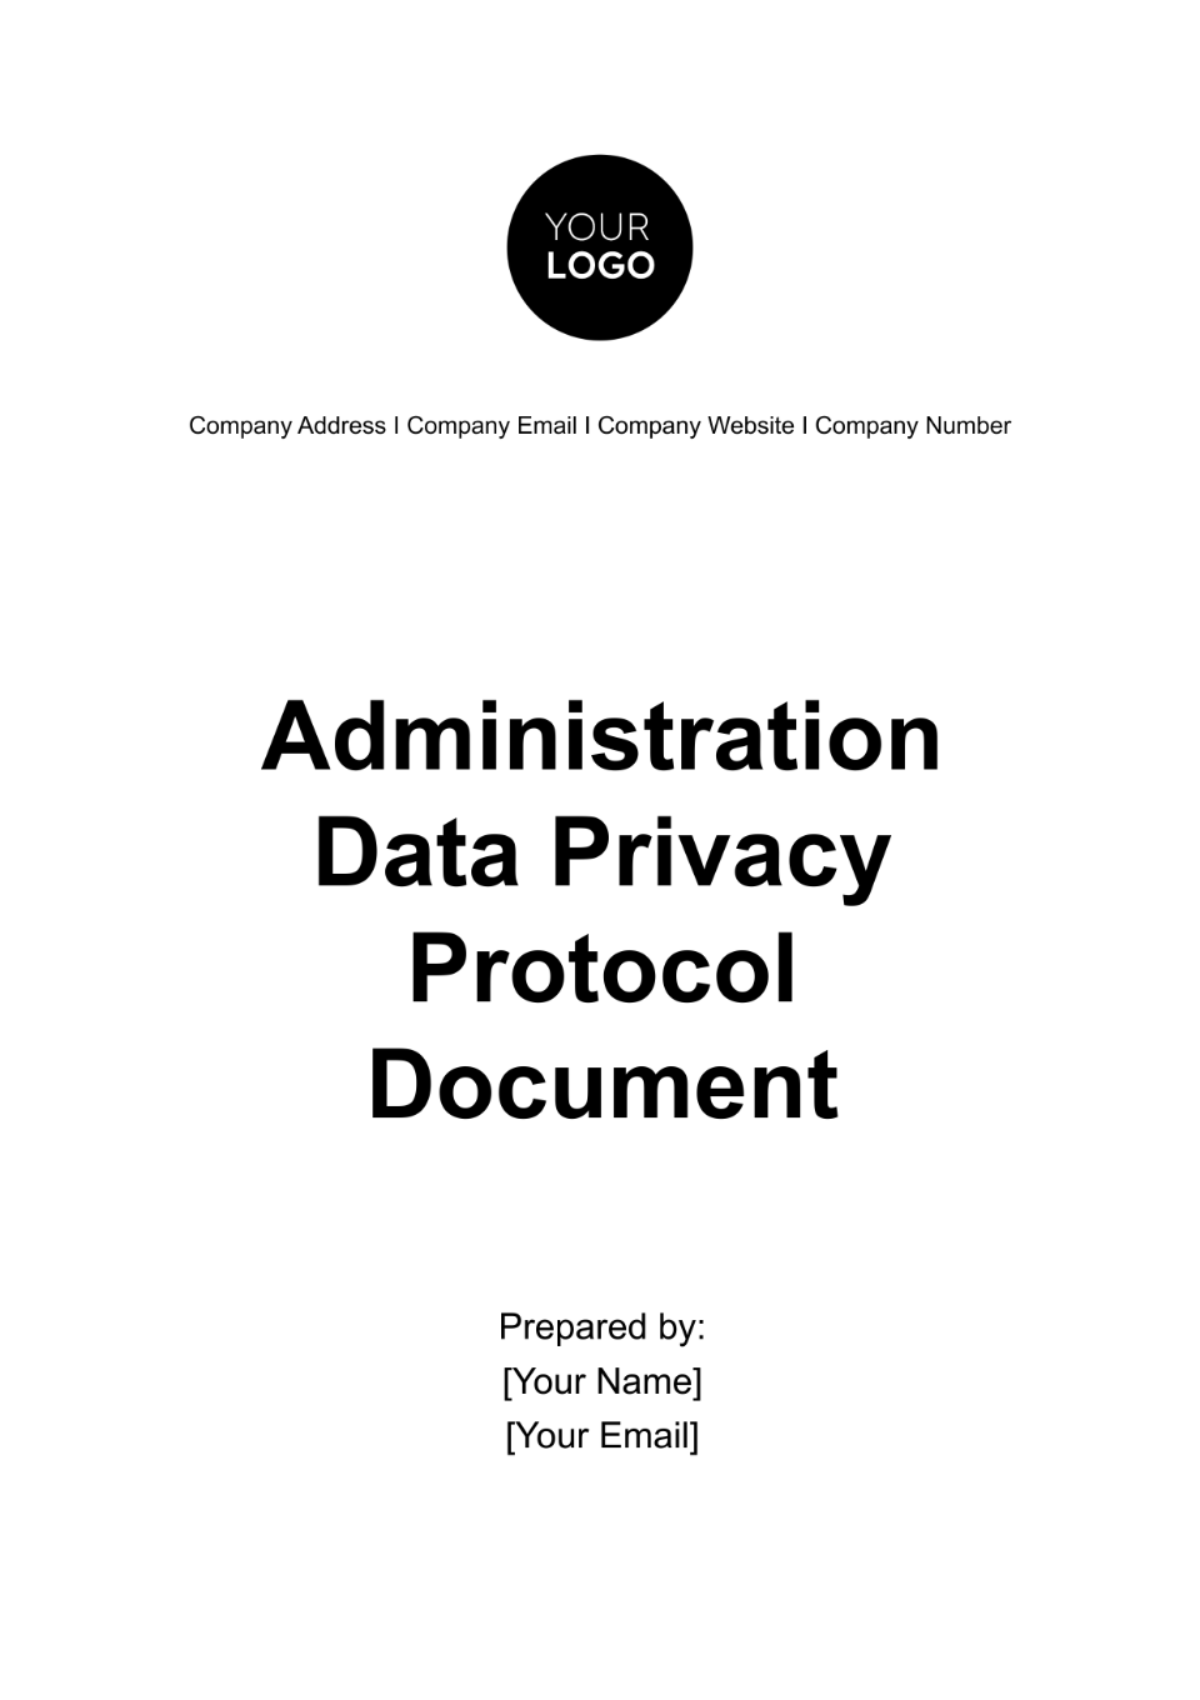 Administration Data Privacy Protocol Document Template